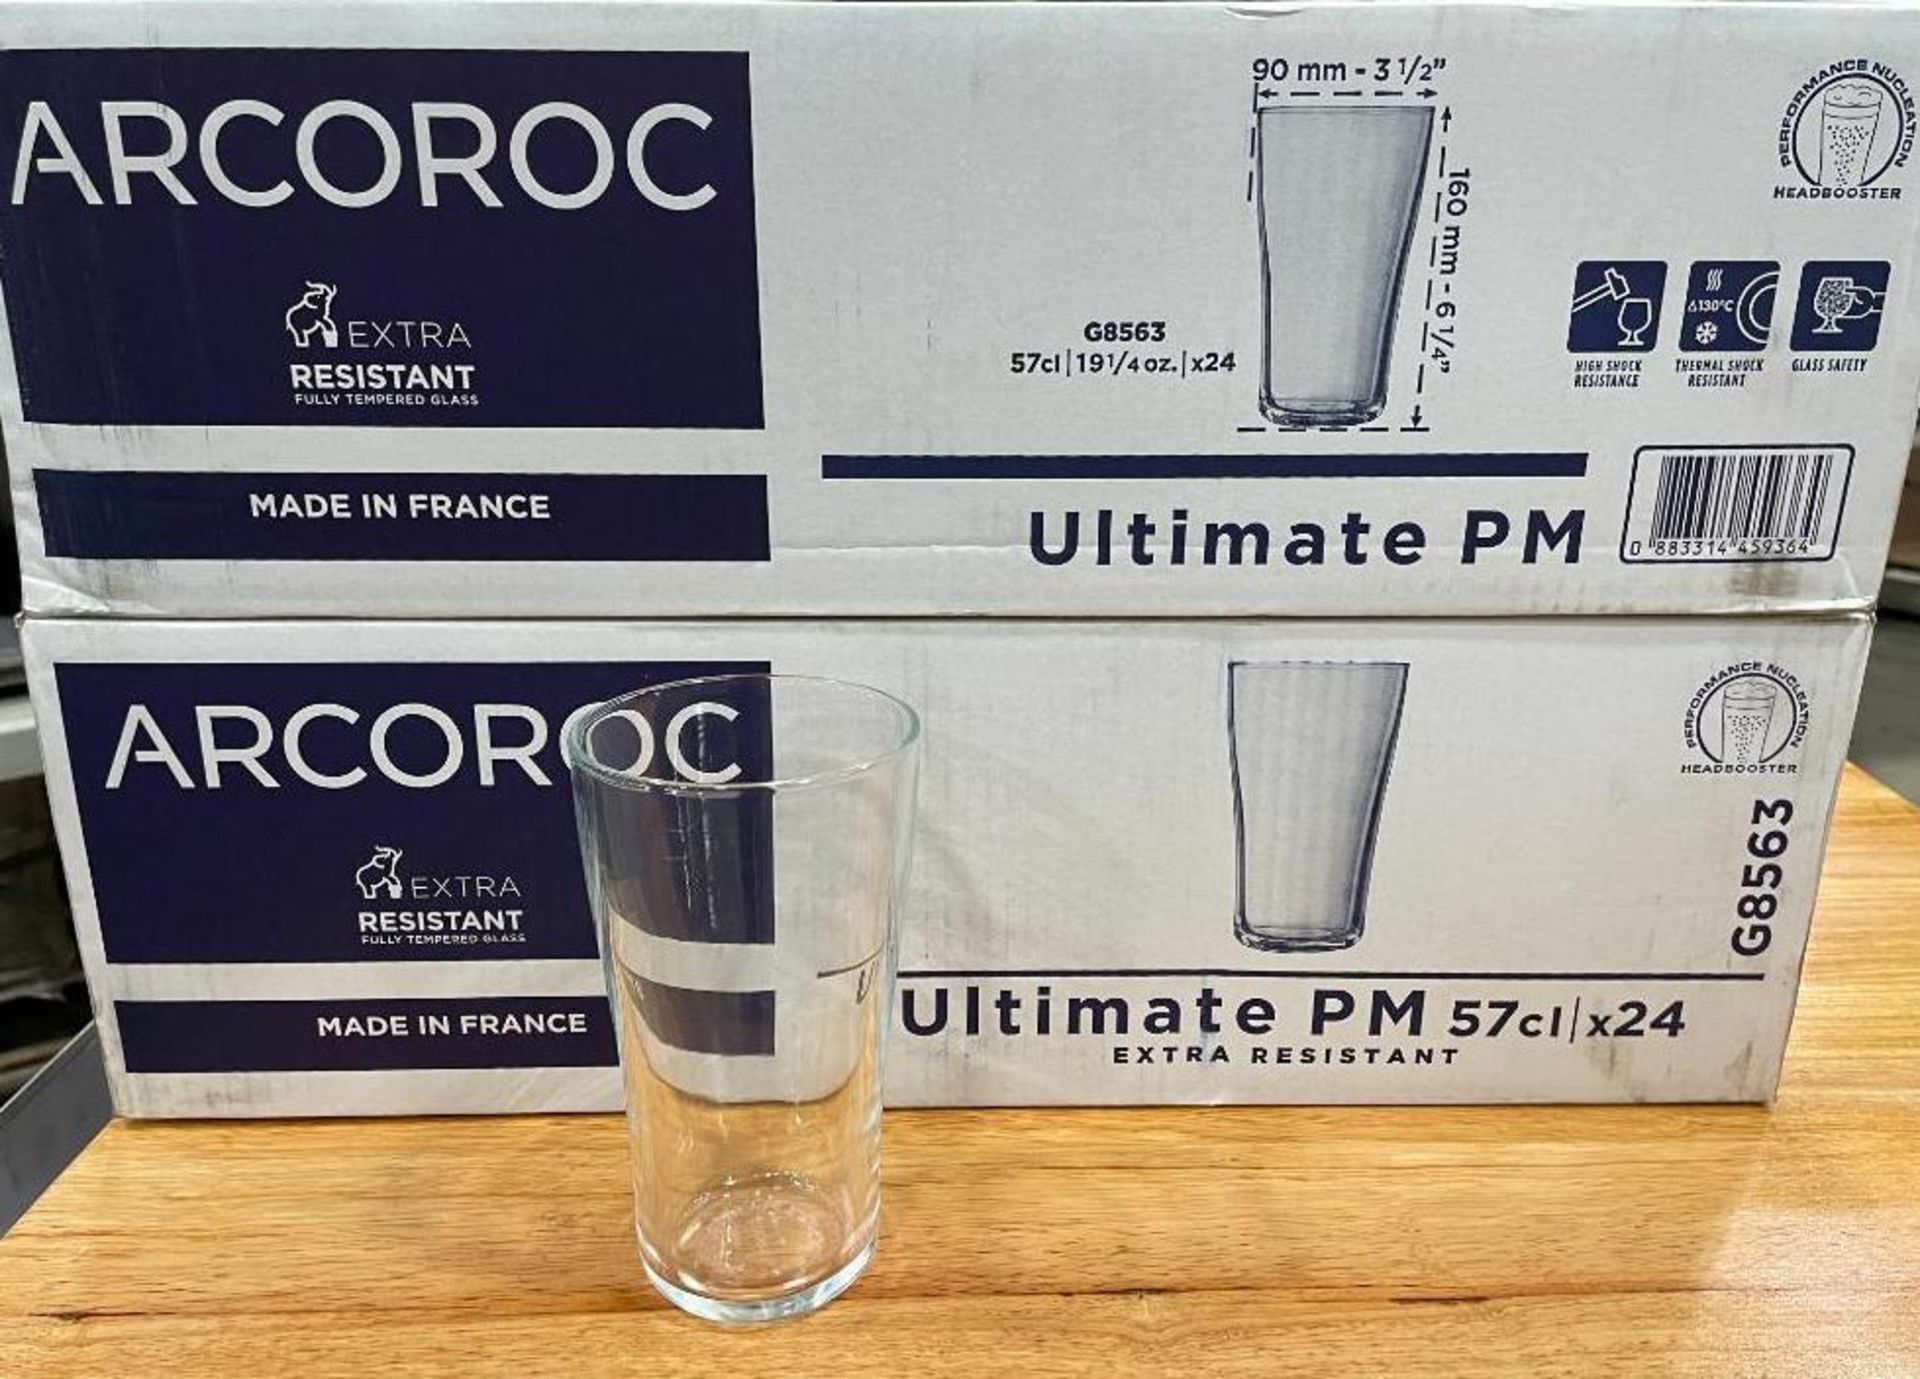 2 CASES OF ULTIMATE 20OZ PINT GLASSES, 24 PER CASE, ARCOROC G8563 - NEW - Image 6 of 7